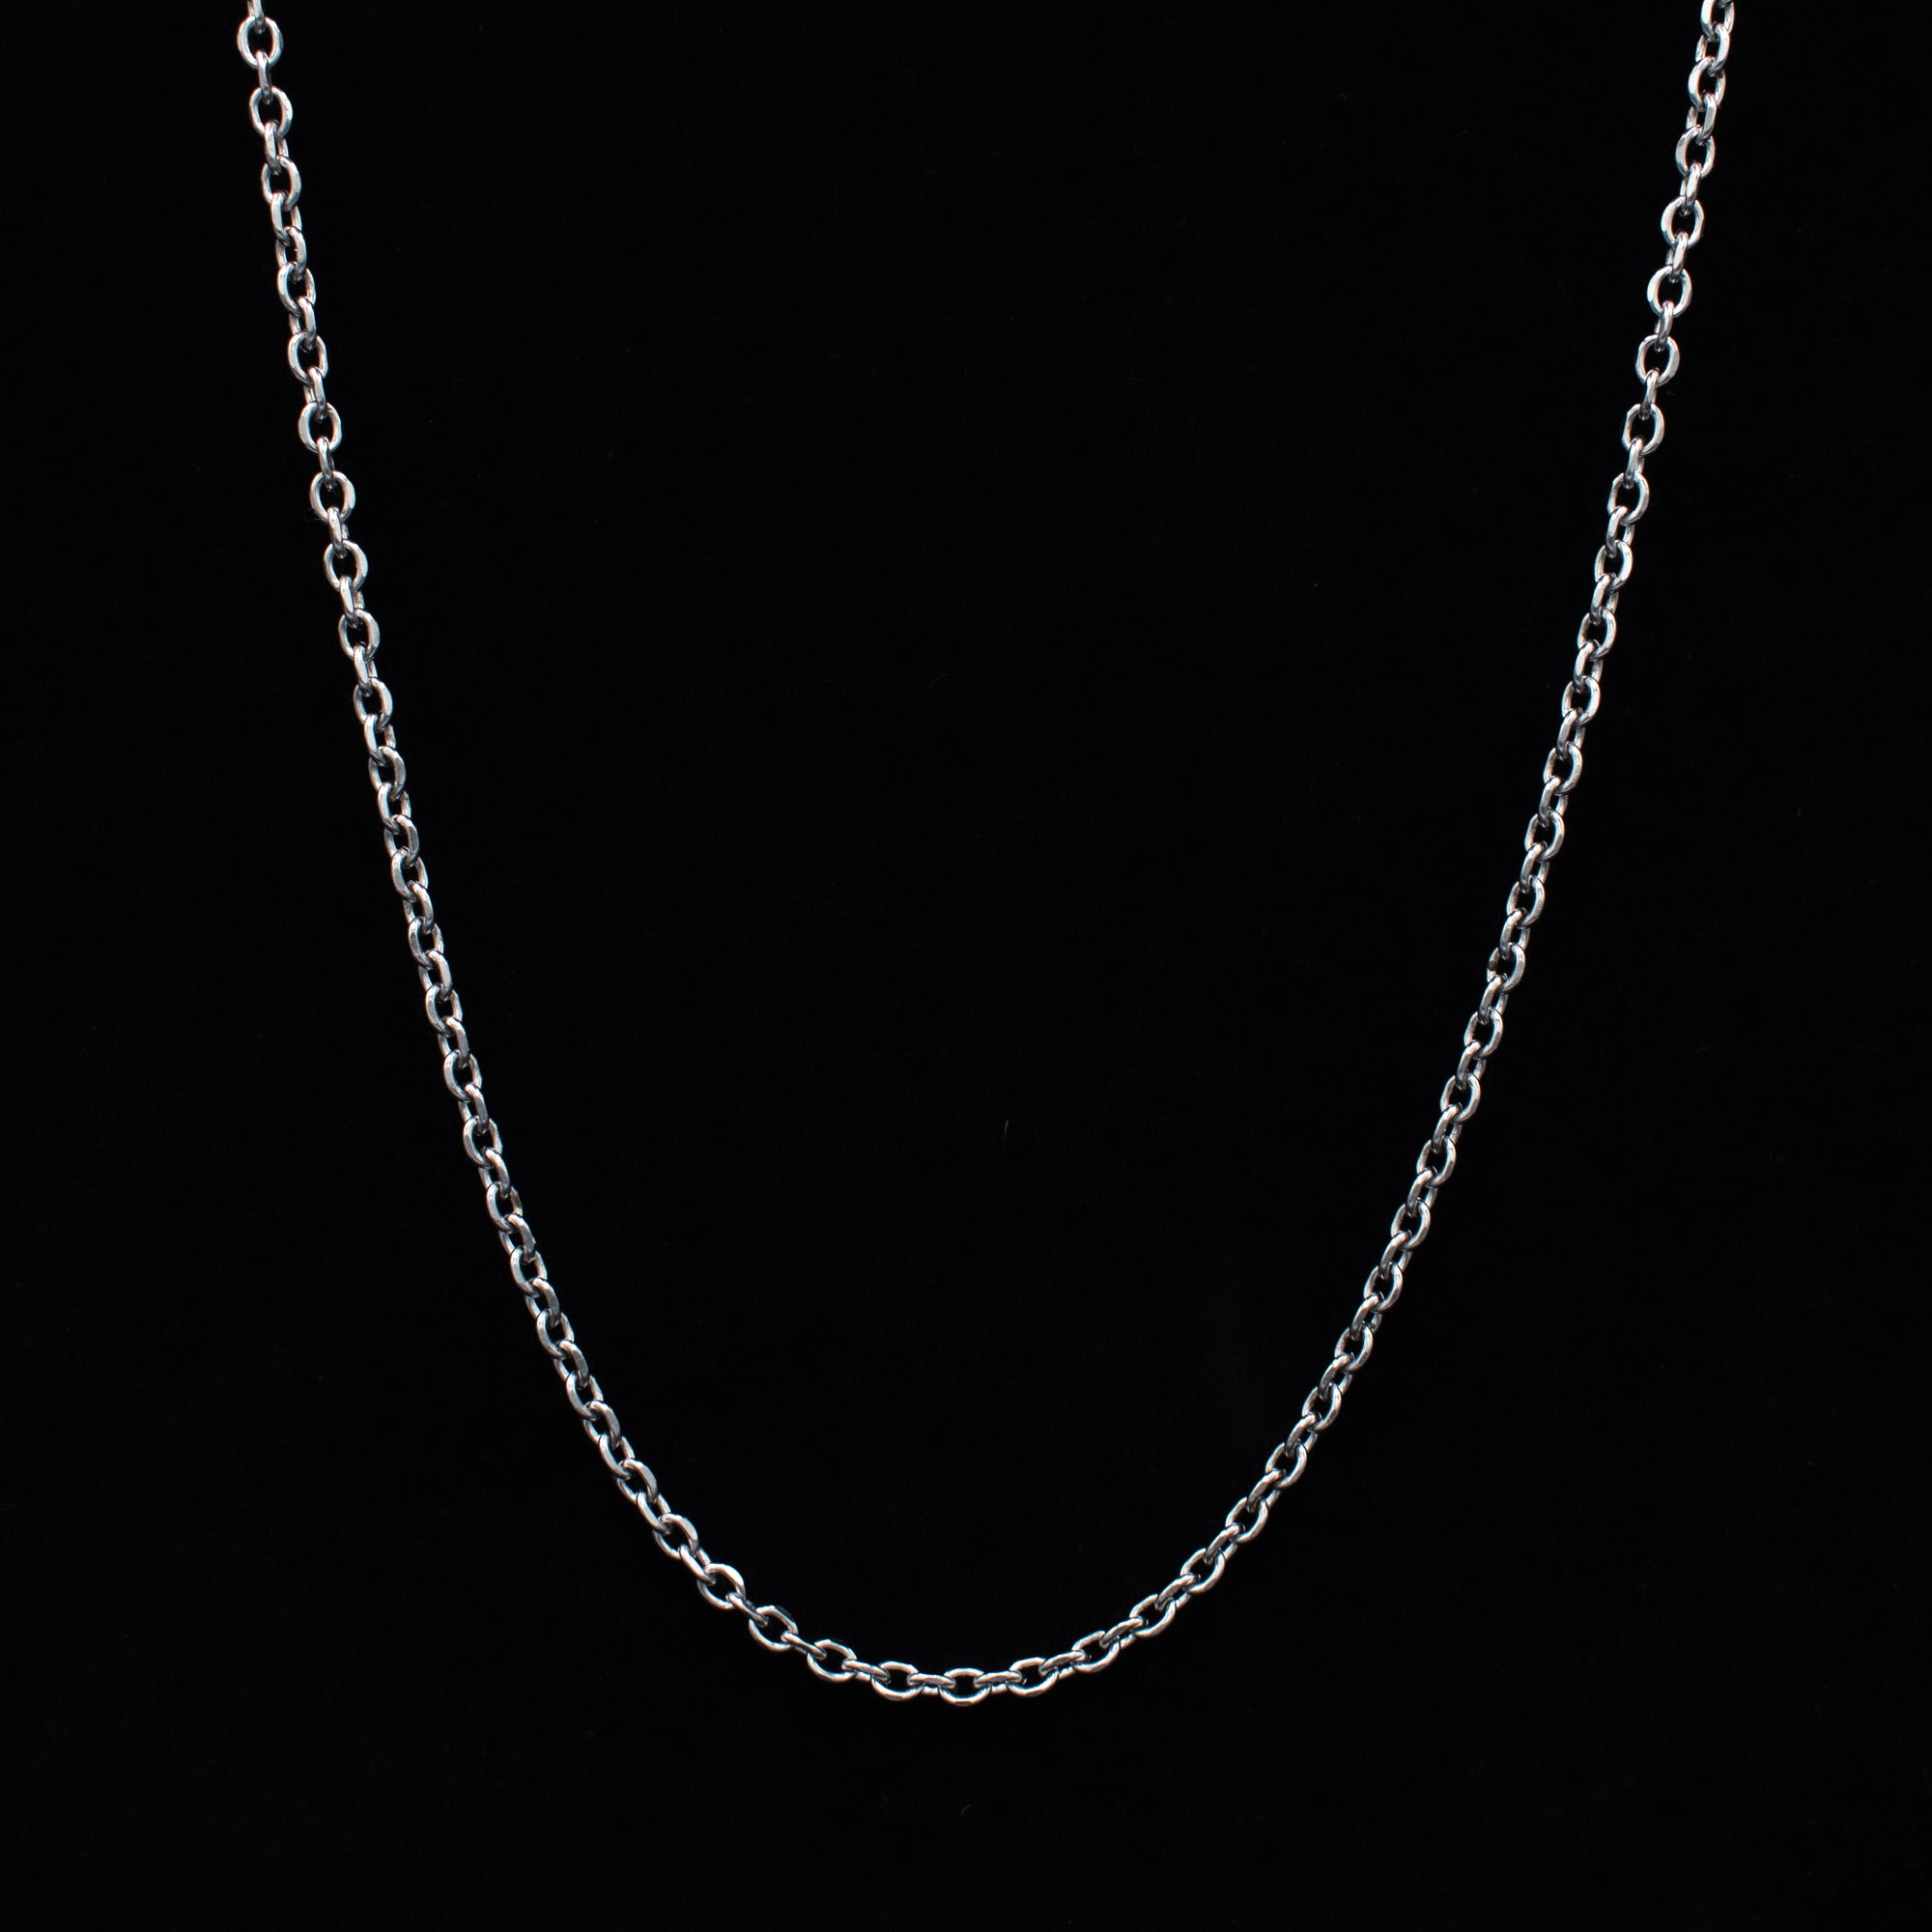 Cable Chain Necklace - (Silver) 4mm